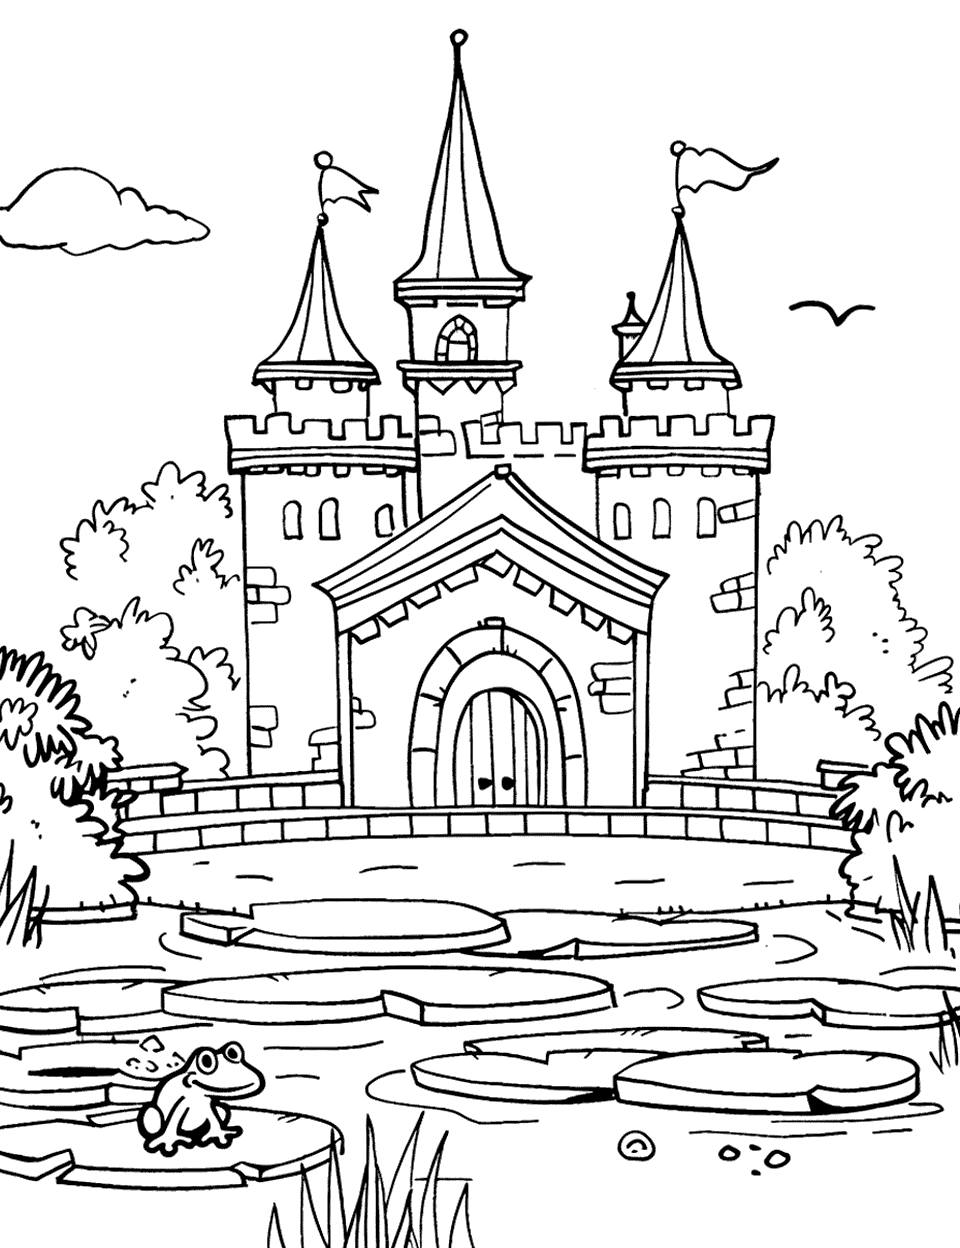 Castle by the Pond Coloring Page - A serene scene with a small castle next to a pond where a single frog sitting on a lily pad.